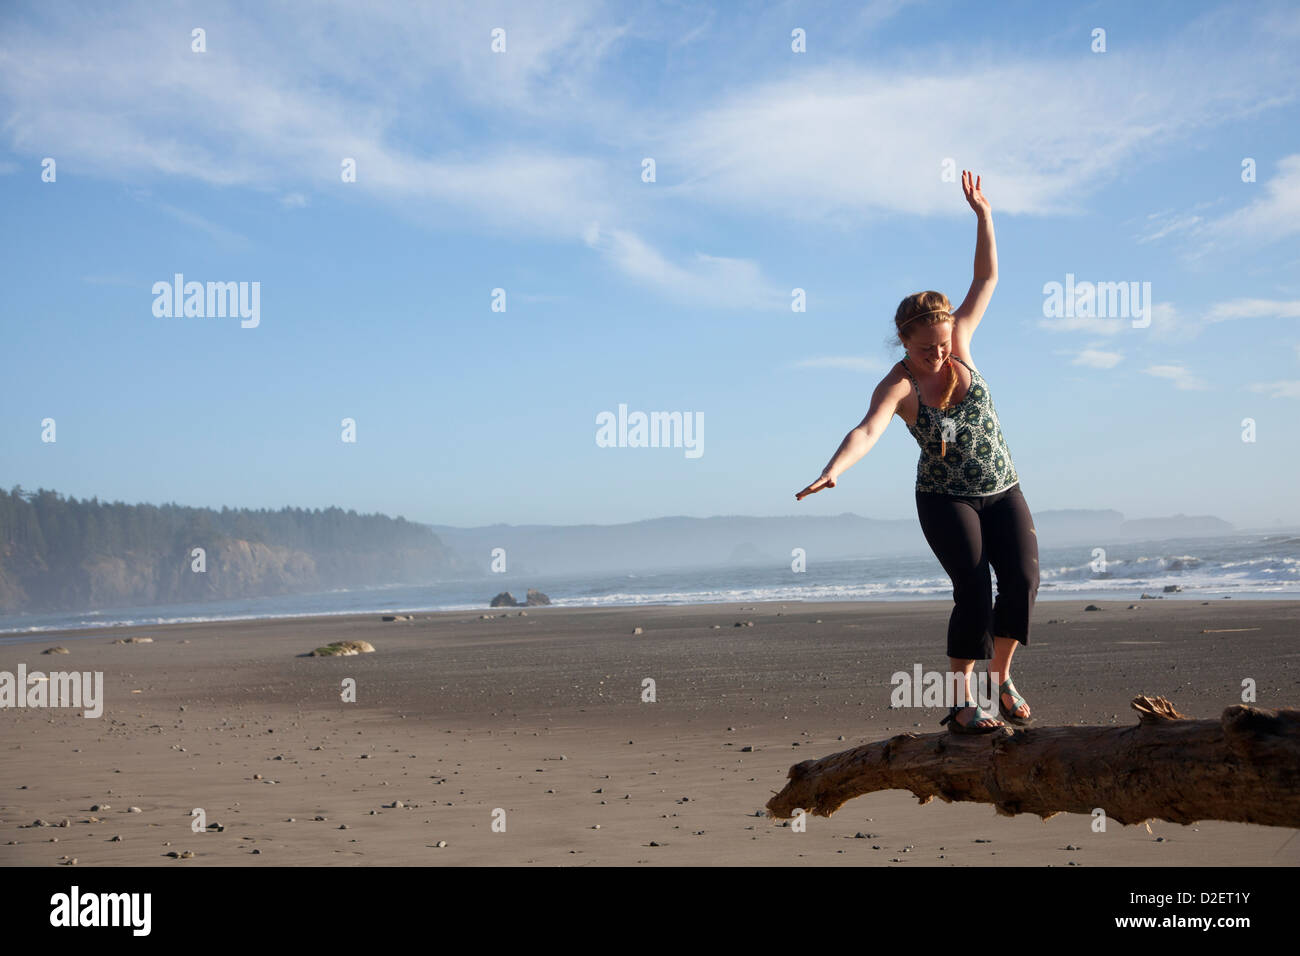 Young woman balancing on log near Third Beach in Olympic National Park, WA. Stock Photo